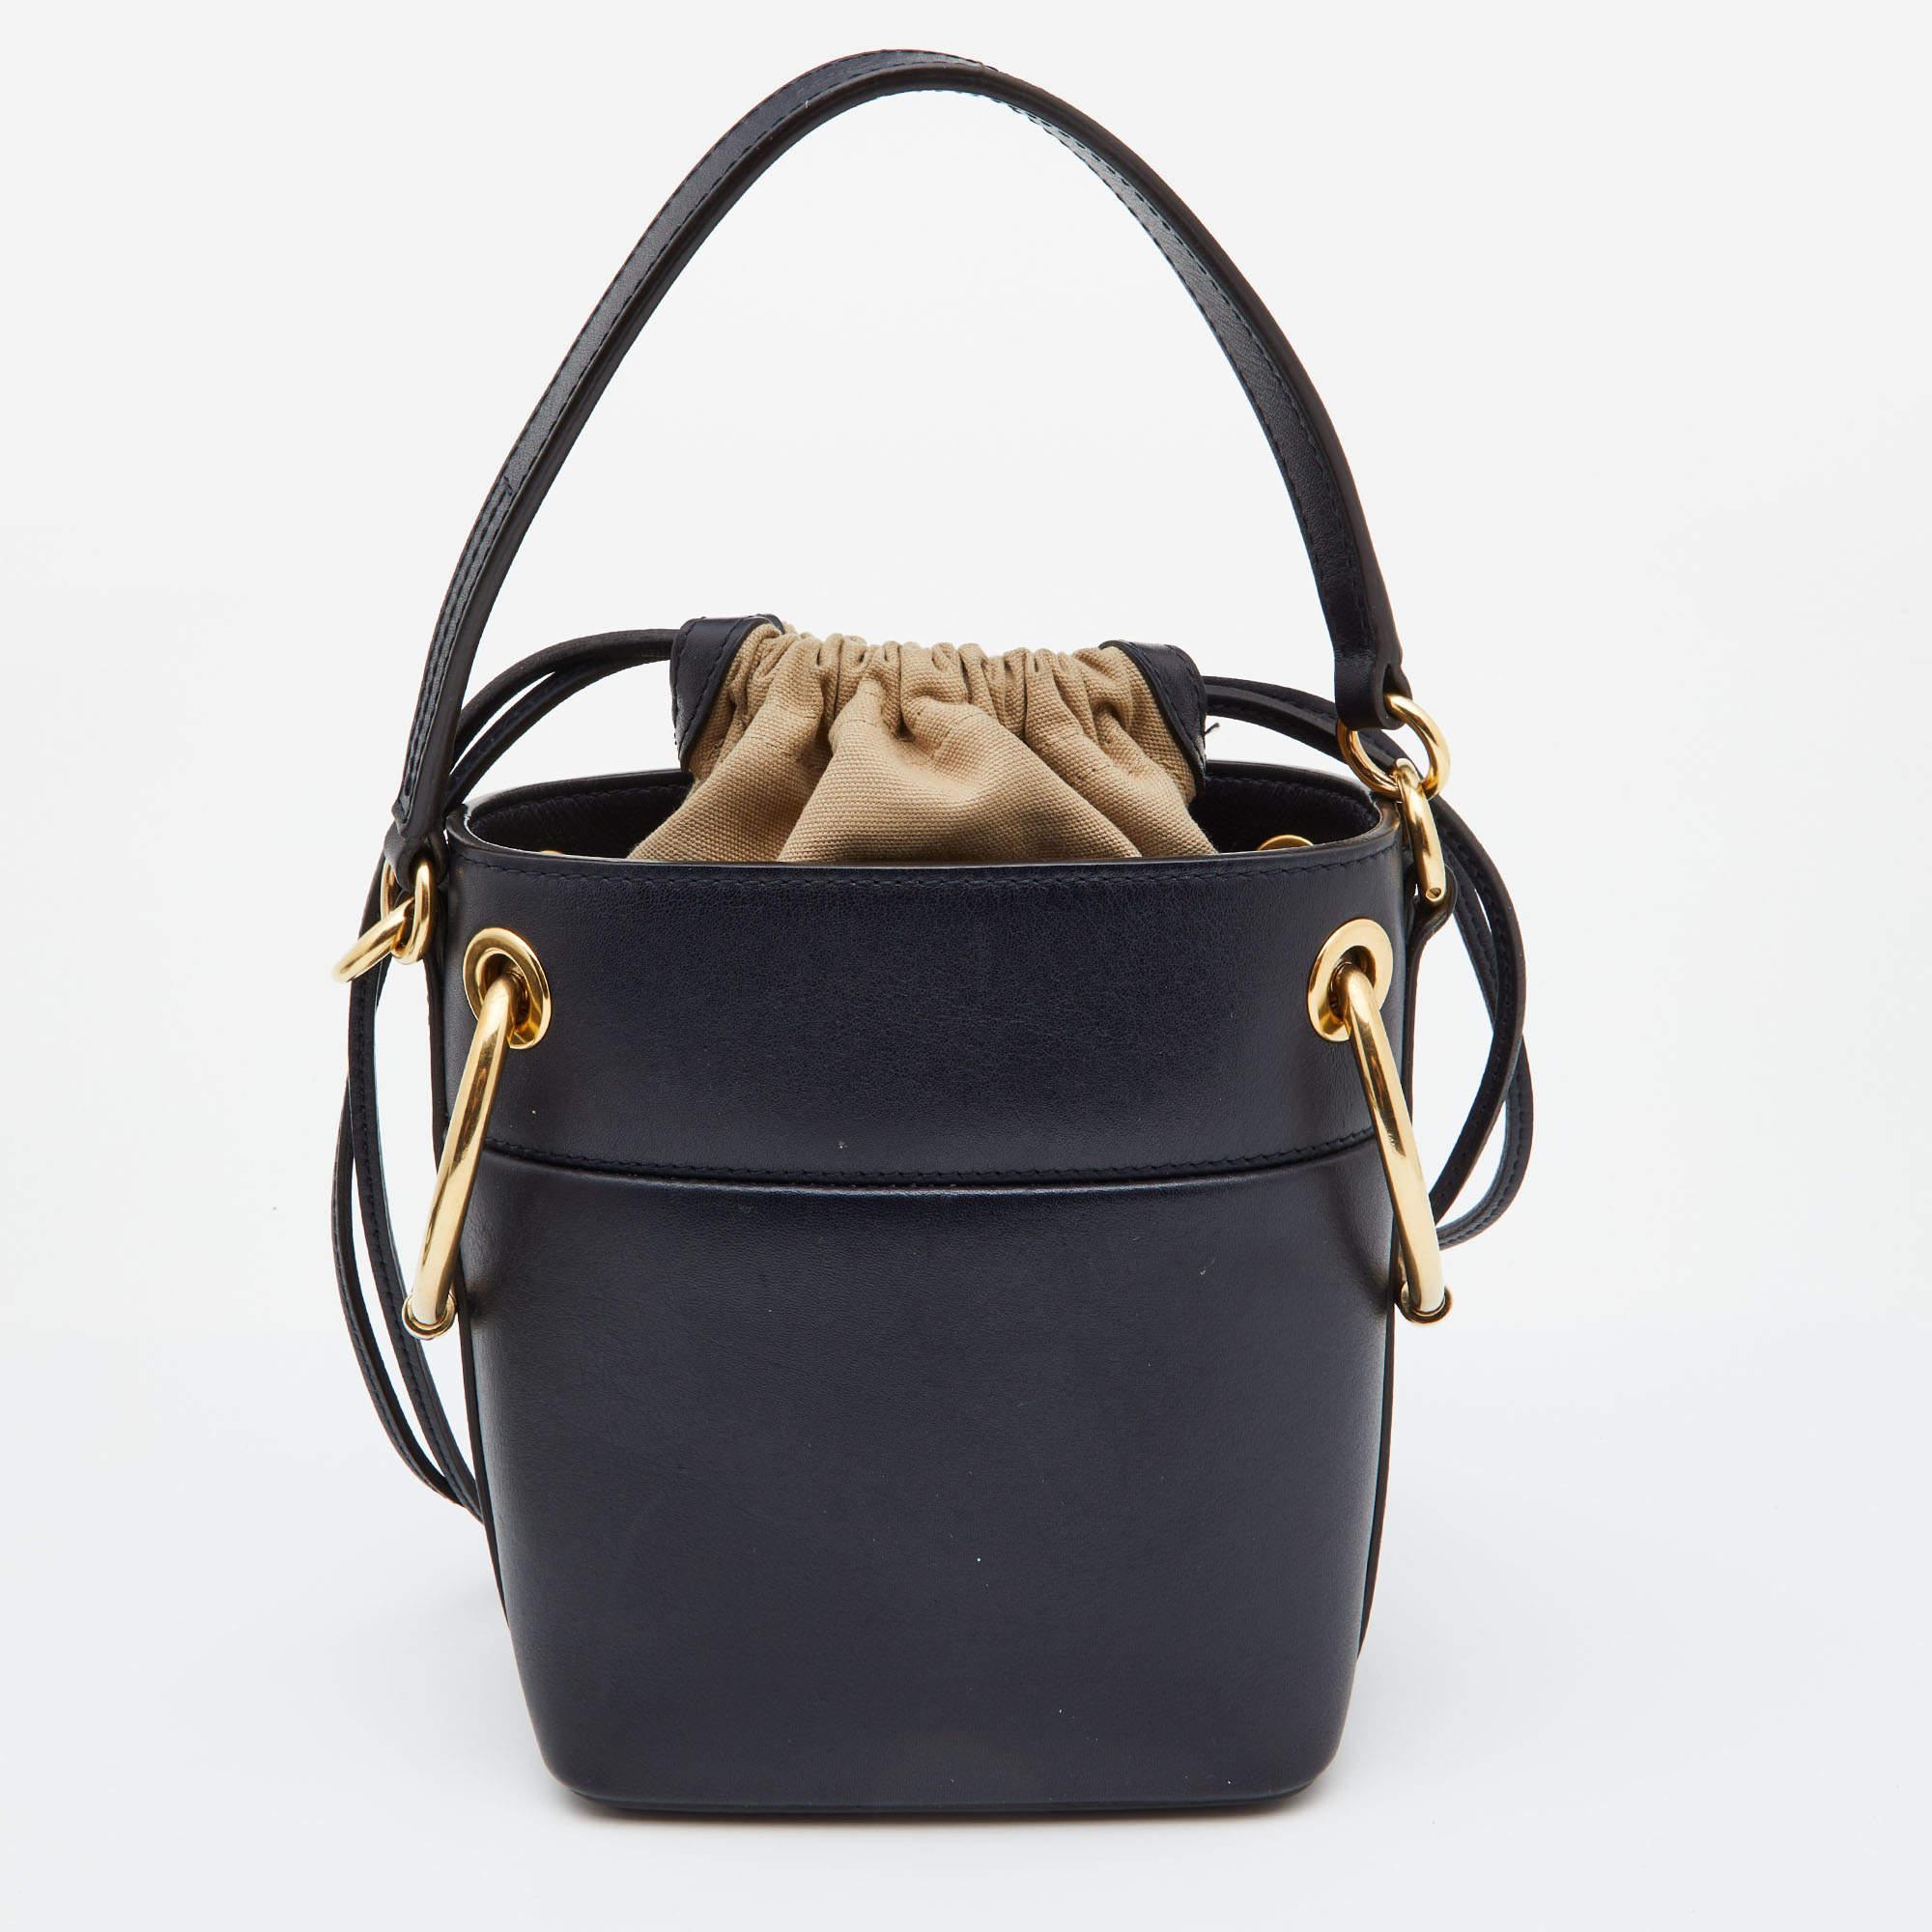 This Chloe accessory is an example of the brand's fine designs that are skillfully crafted to project a classic charm. It is a functional creation with an elevating appeal.

Includes: Detachable Strap